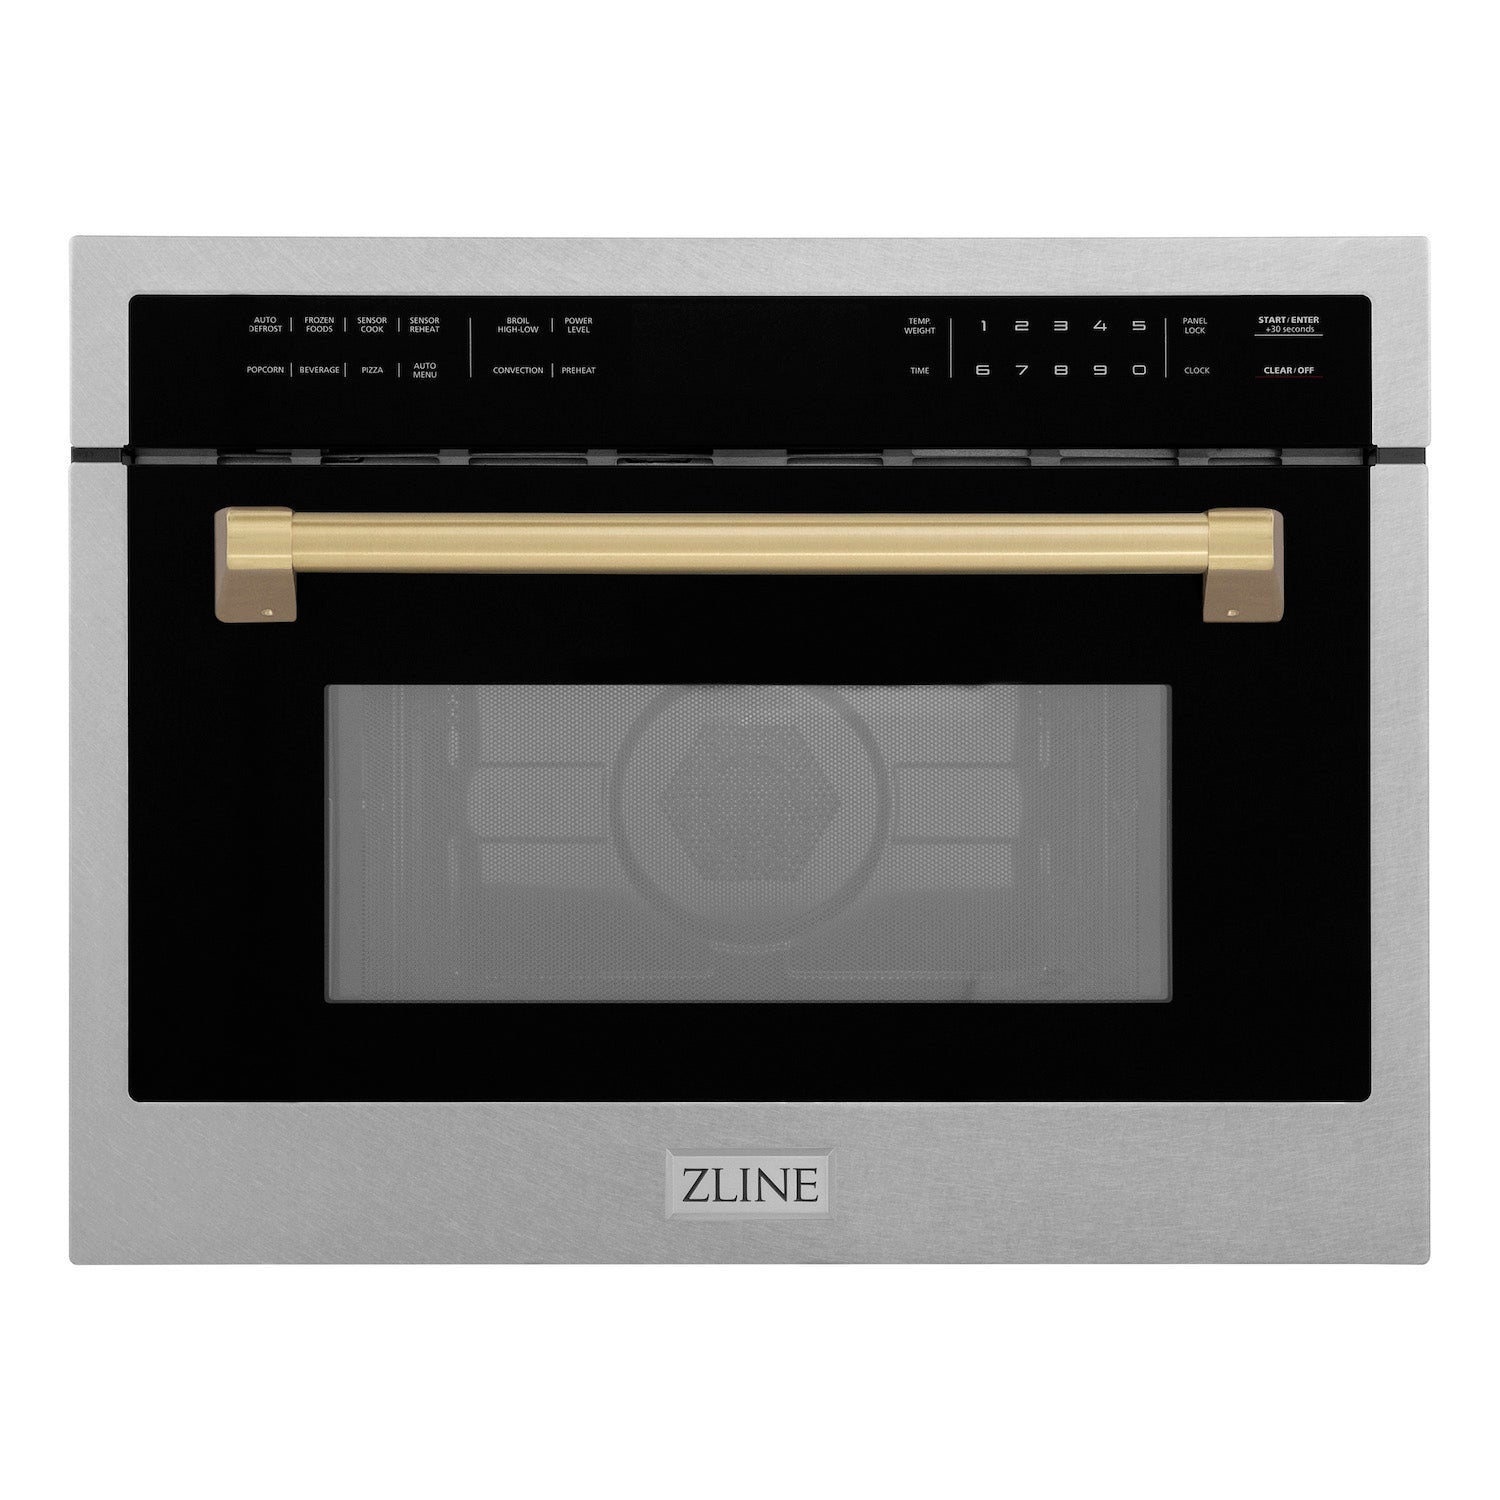 ZLINE Autograph Edition 24 in. 1.6 cu ft. Built-in Convection Microwave Oven in DuraSnow Stainless Steel with Champagne Bronze Accents front with door closed.